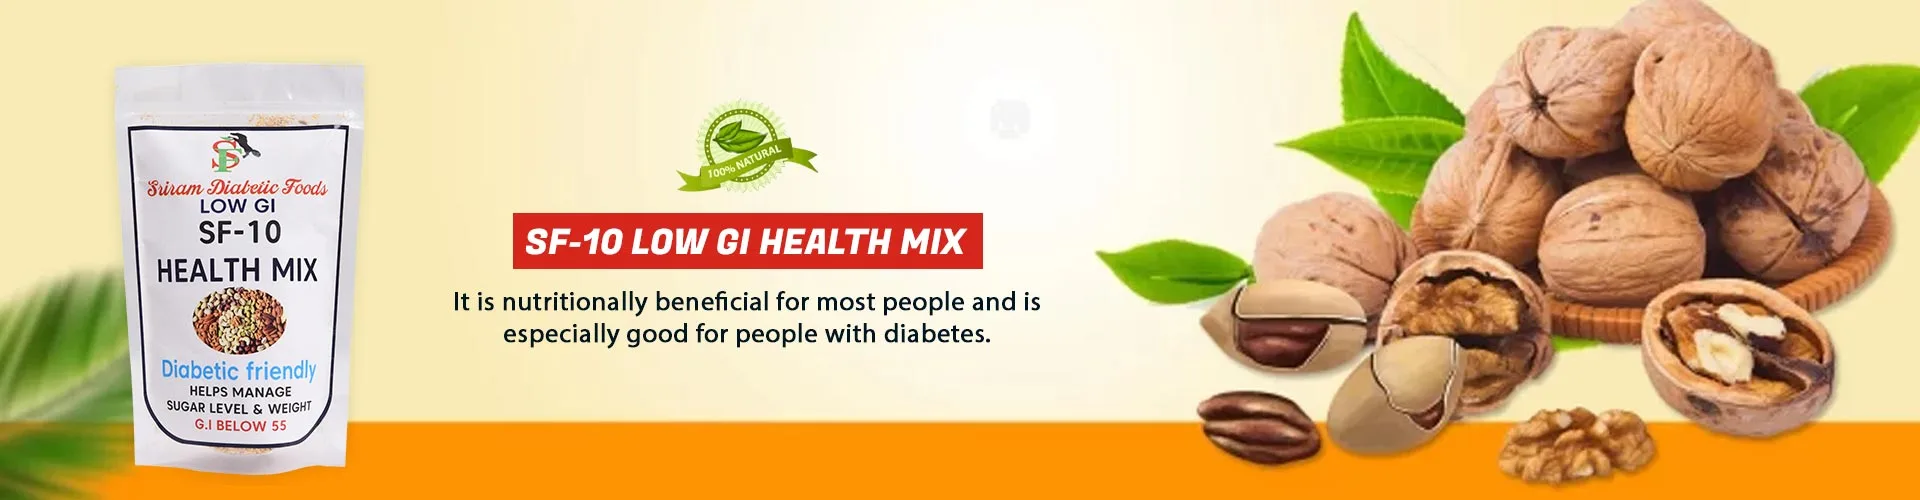 Health Mix Manufacturers in Ras Laffan Industrial City